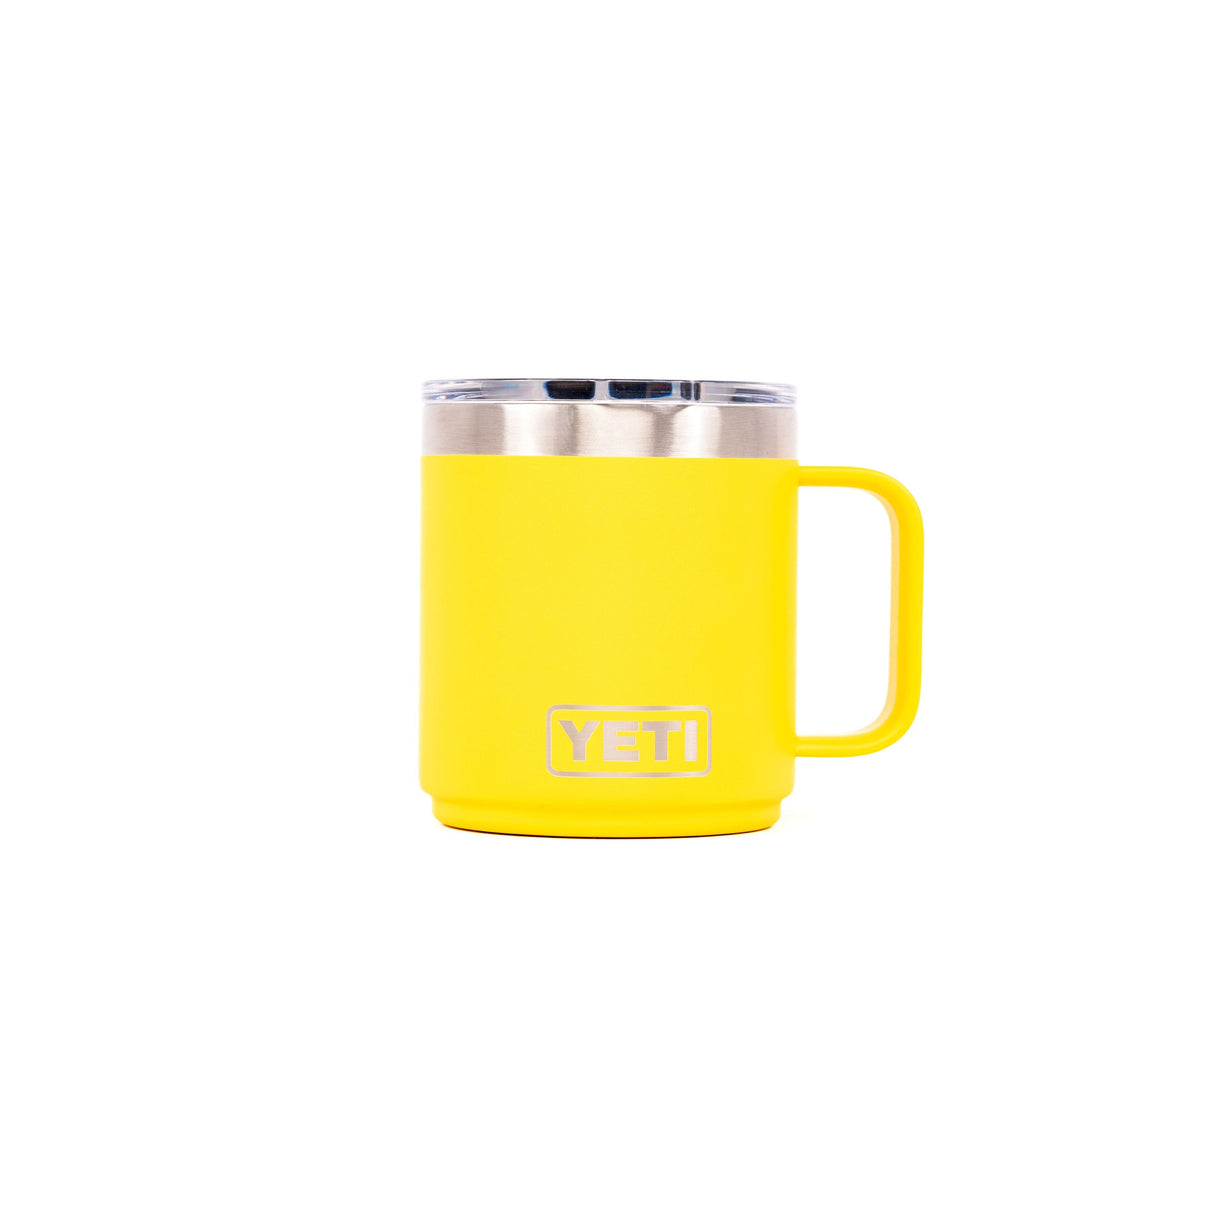 YETI® RAMBLER 10 OZ Tumbler with Magslider Lid - includes logo